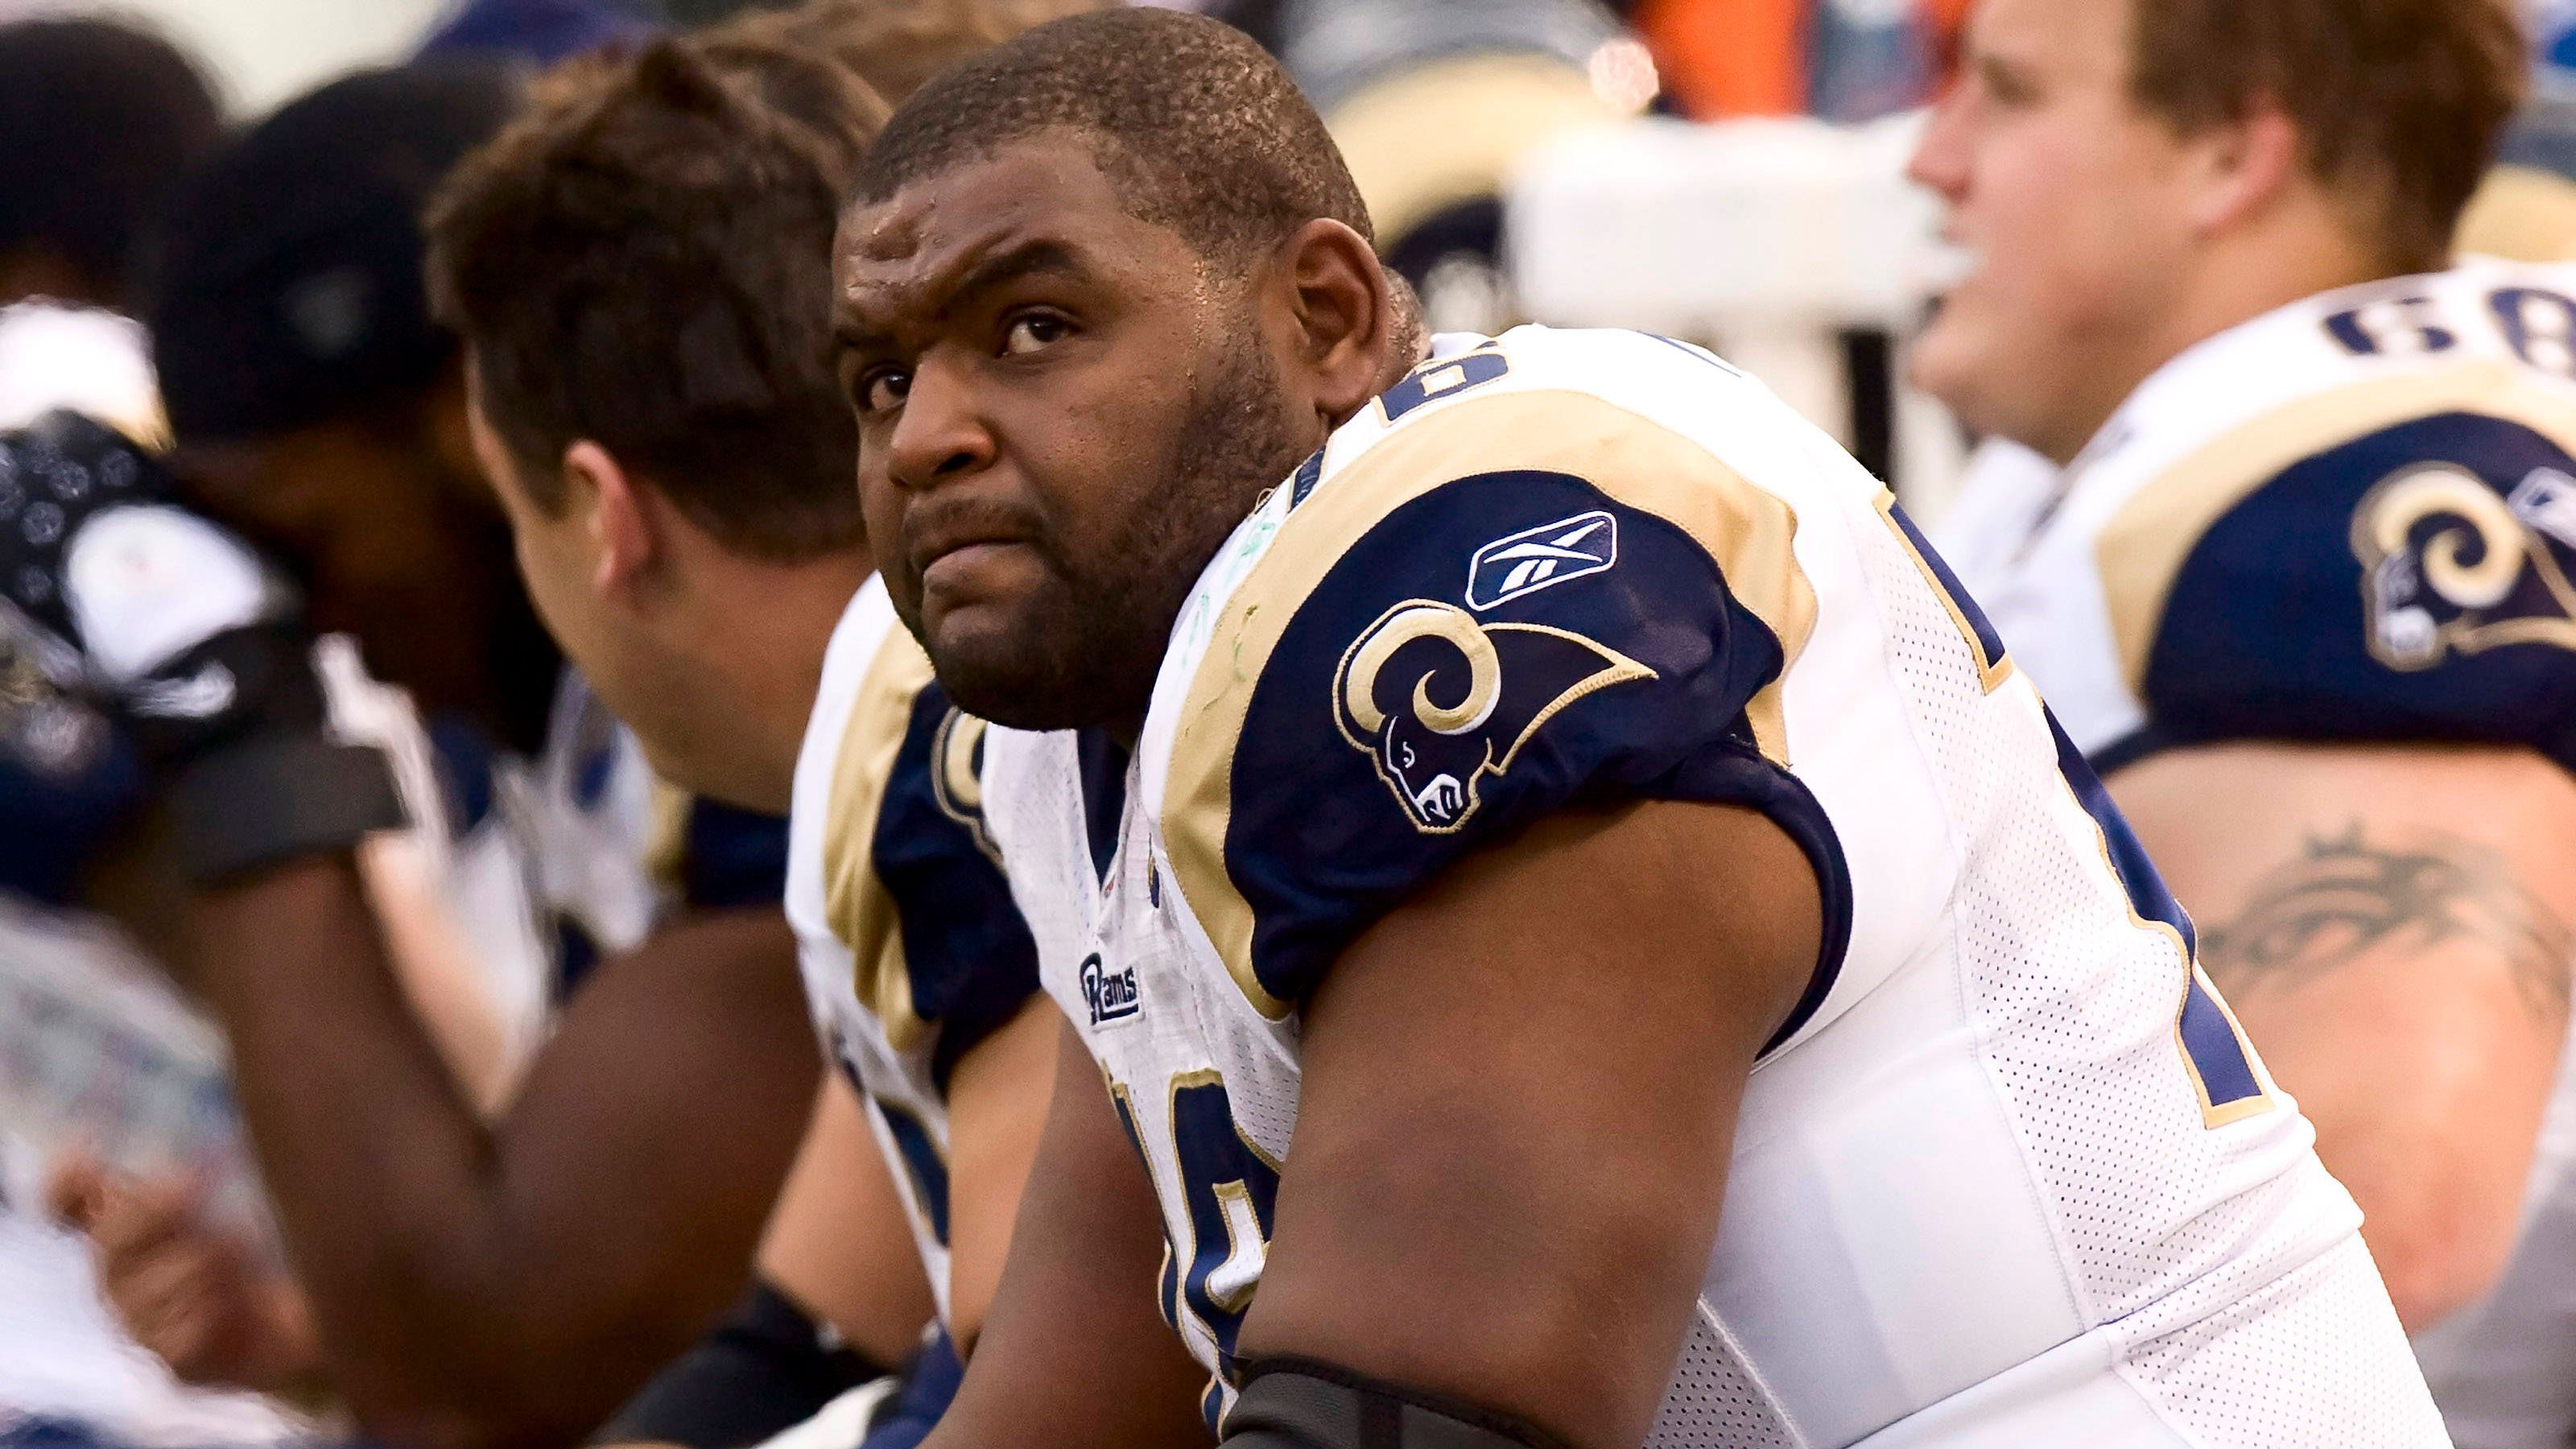 <strong>Orlando Pace - 1997</strong><br>Position: Offensive Tackle<br>Draft-Team: St. Louis Rams <br>Erfolge: 7x Pro Bowl, Super Bowl Champion<br>Karriereende: 2009